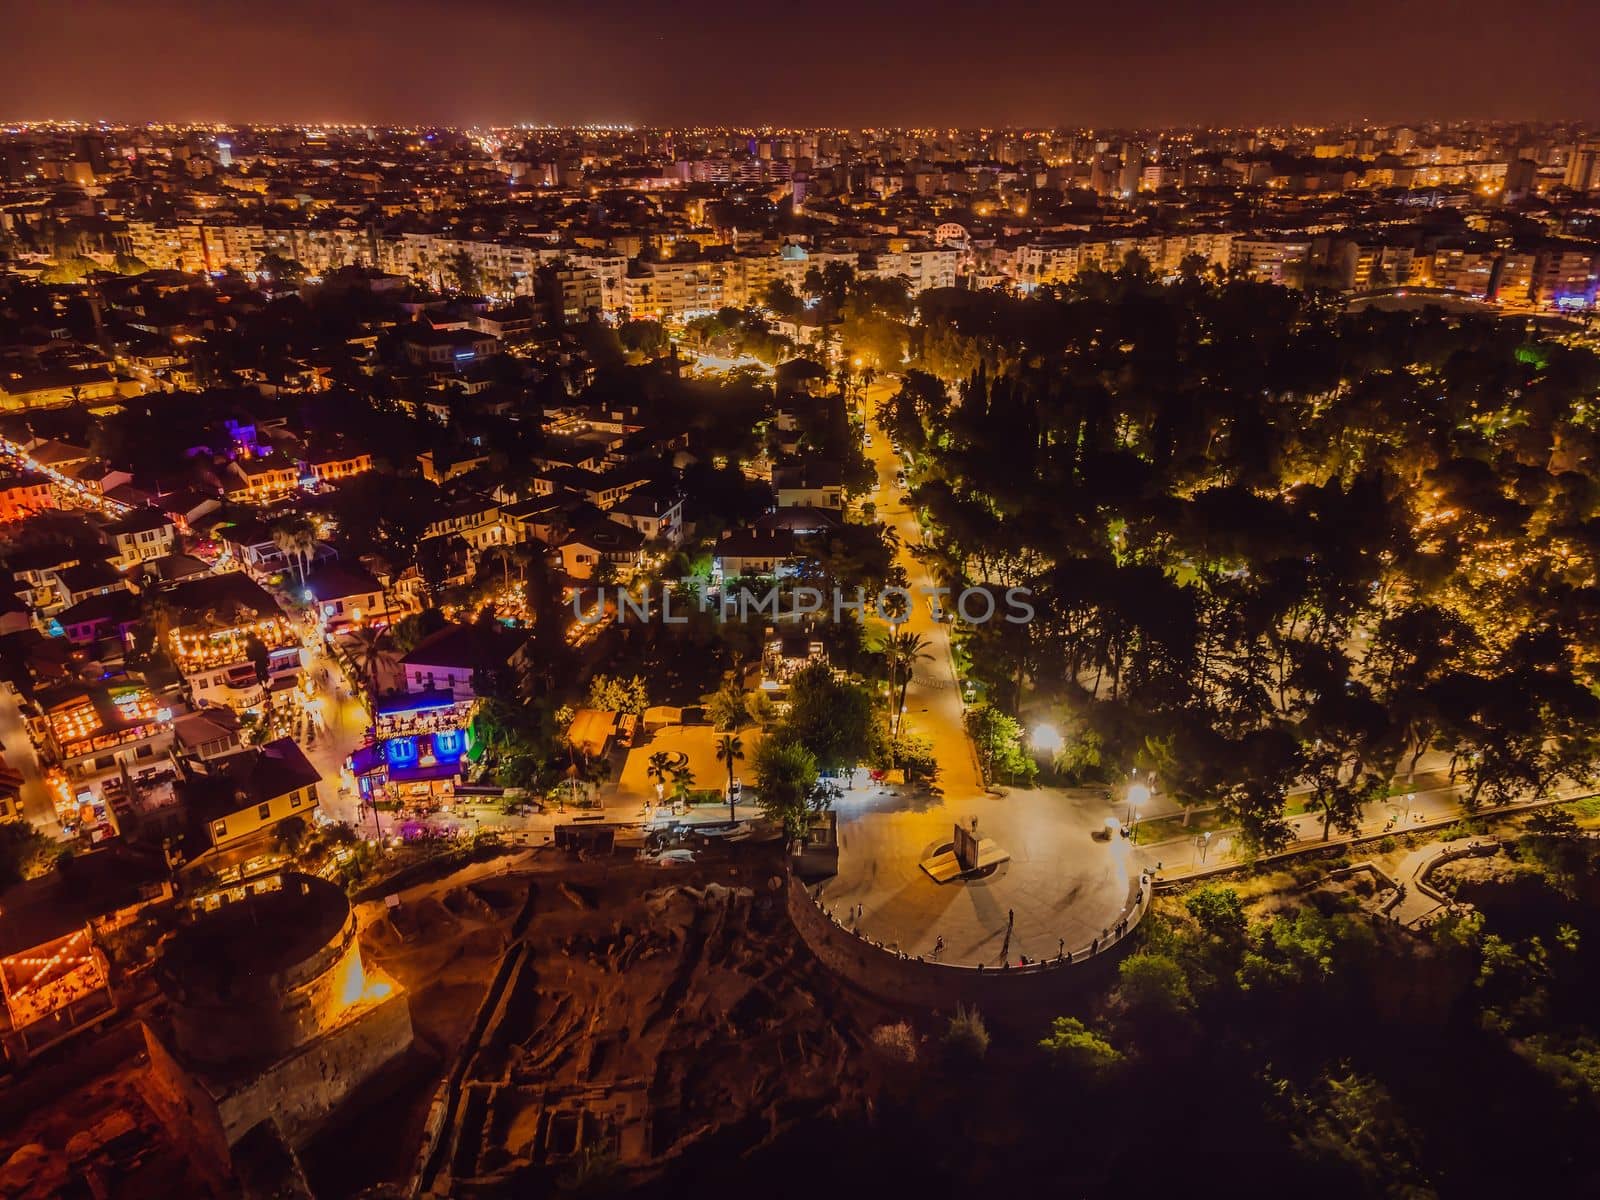 Night top aerial view of the old town Kaleici and old harbor in Antalya, Turkey. Turkey is a popular tourist destination.